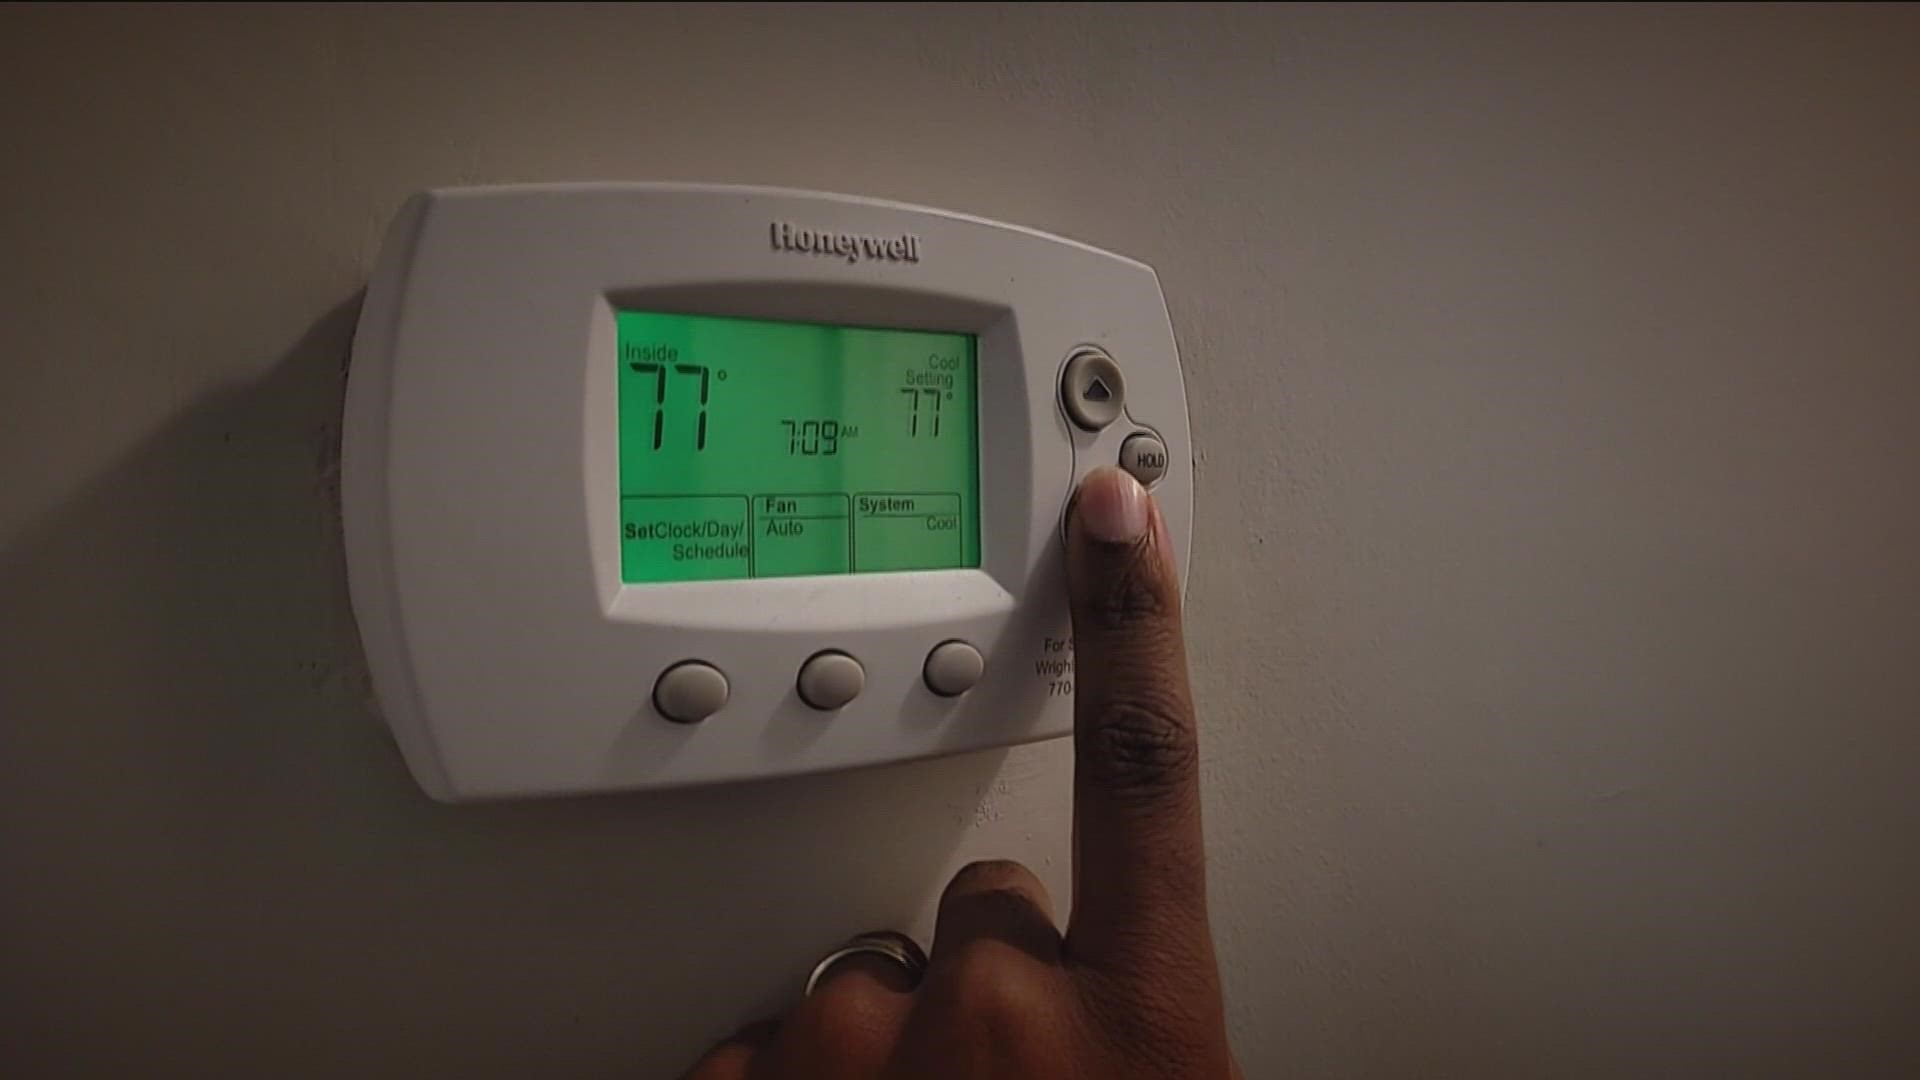 Home heating costs are on the rise, but there are simple steps homeowners can take to save on their energy bills.